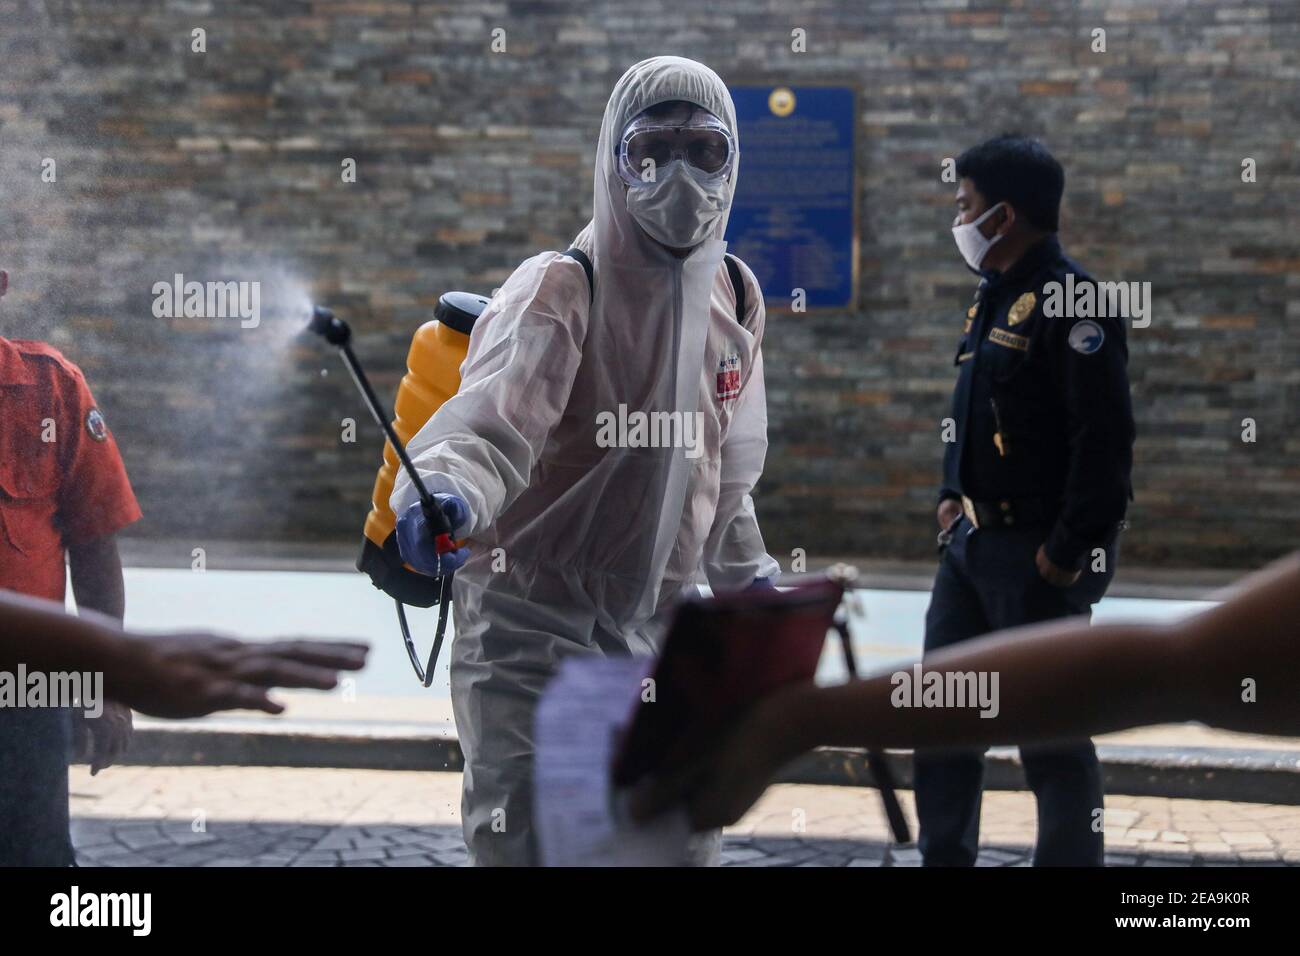 A worker disinfects people entering the city hall amid the coronavirus pandemic, in Pasig City, Metro Manila, Philippines. Stock Photo